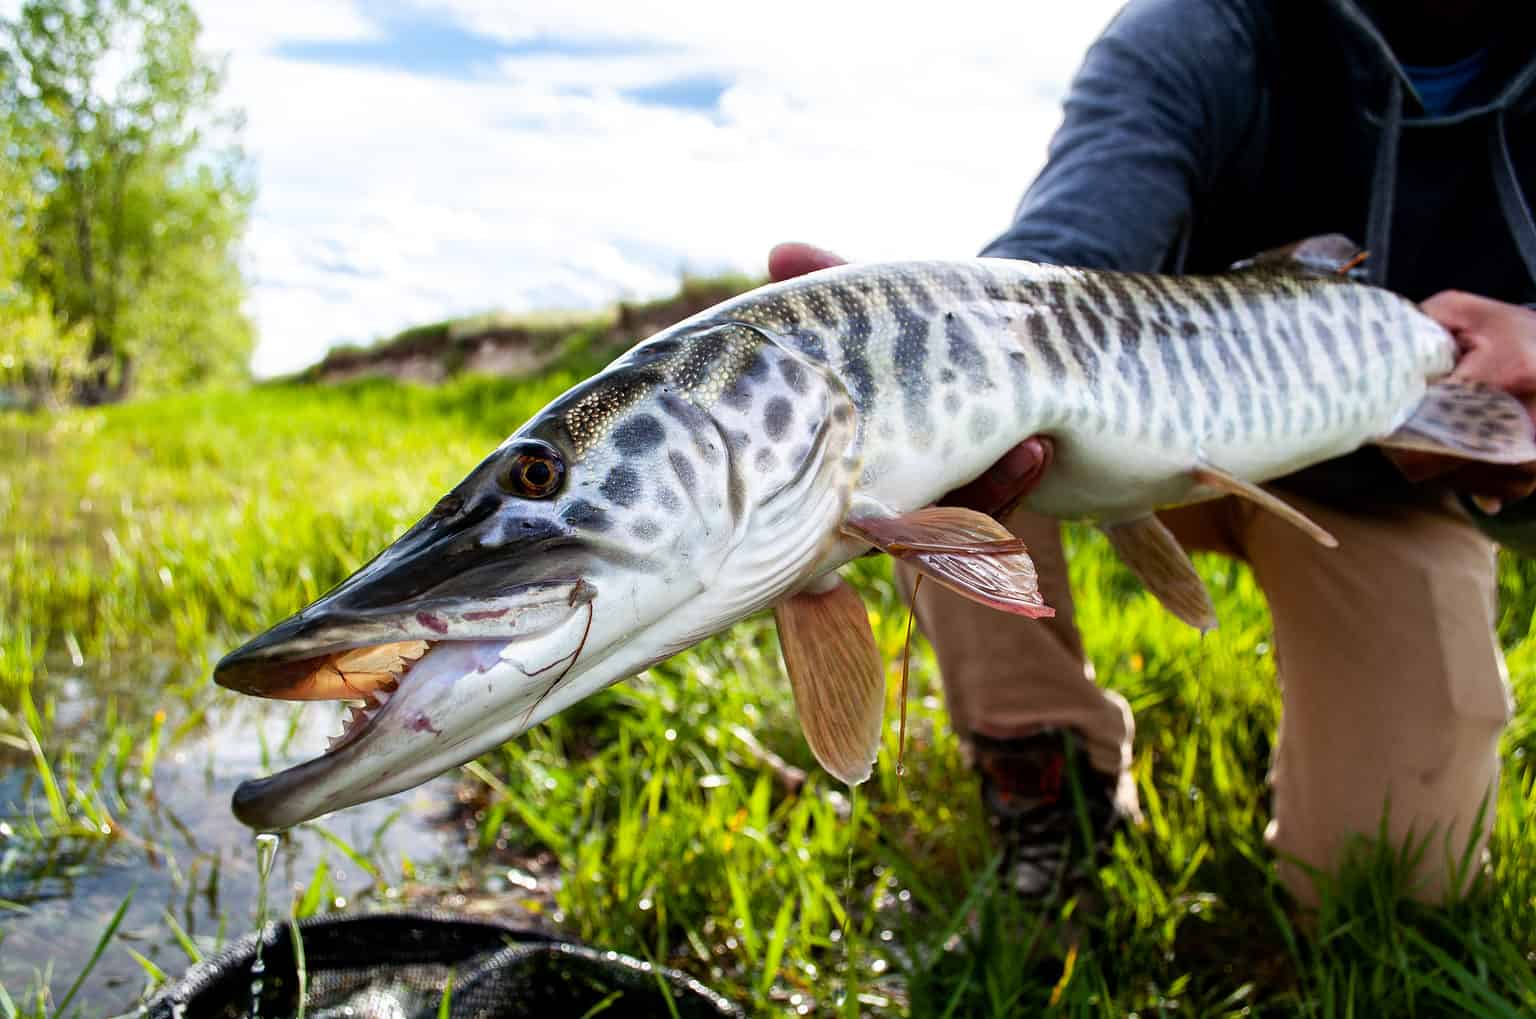 The Largest Tiger Muskellunge Ever Caught In Ohio Was A Fierce Trophy